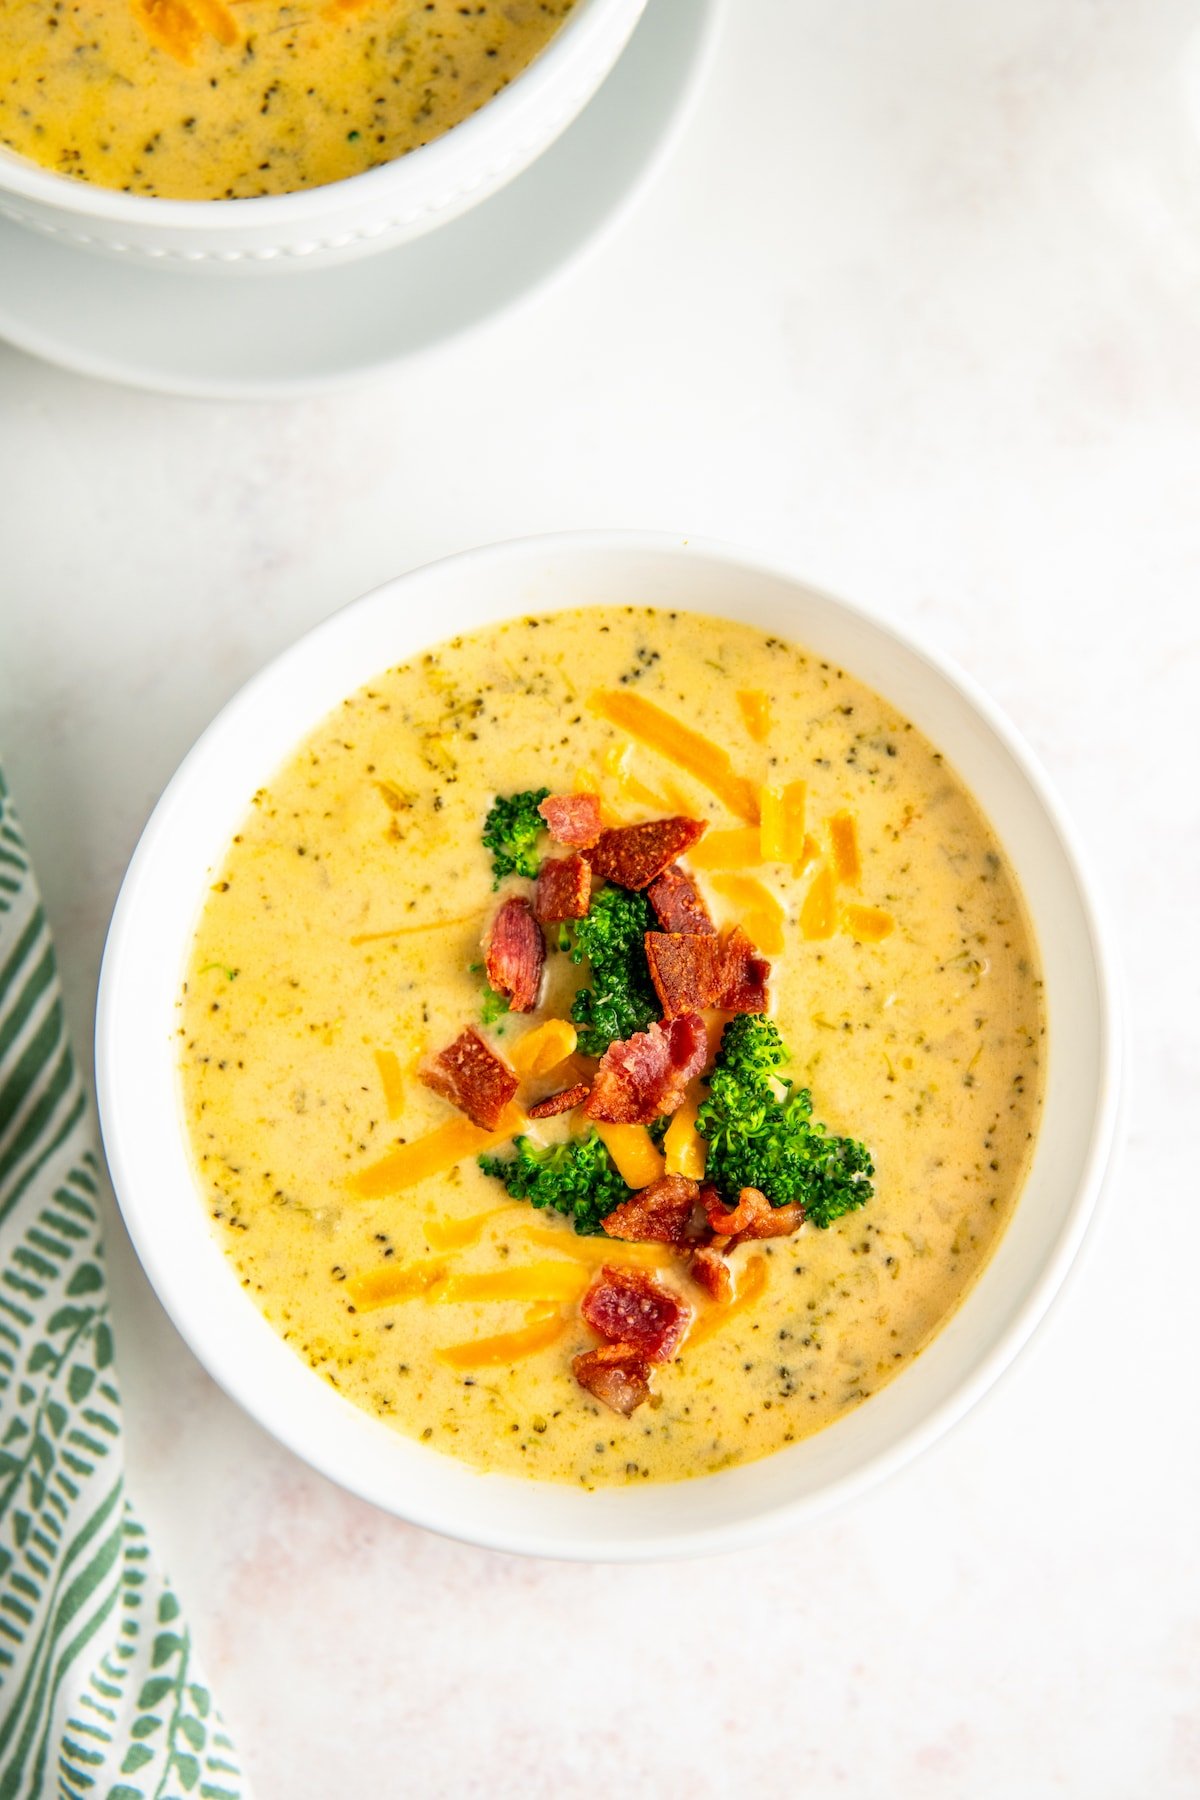 A bowl of soup, garnished with shredded cheese, bacon bits, and broccoli florets.